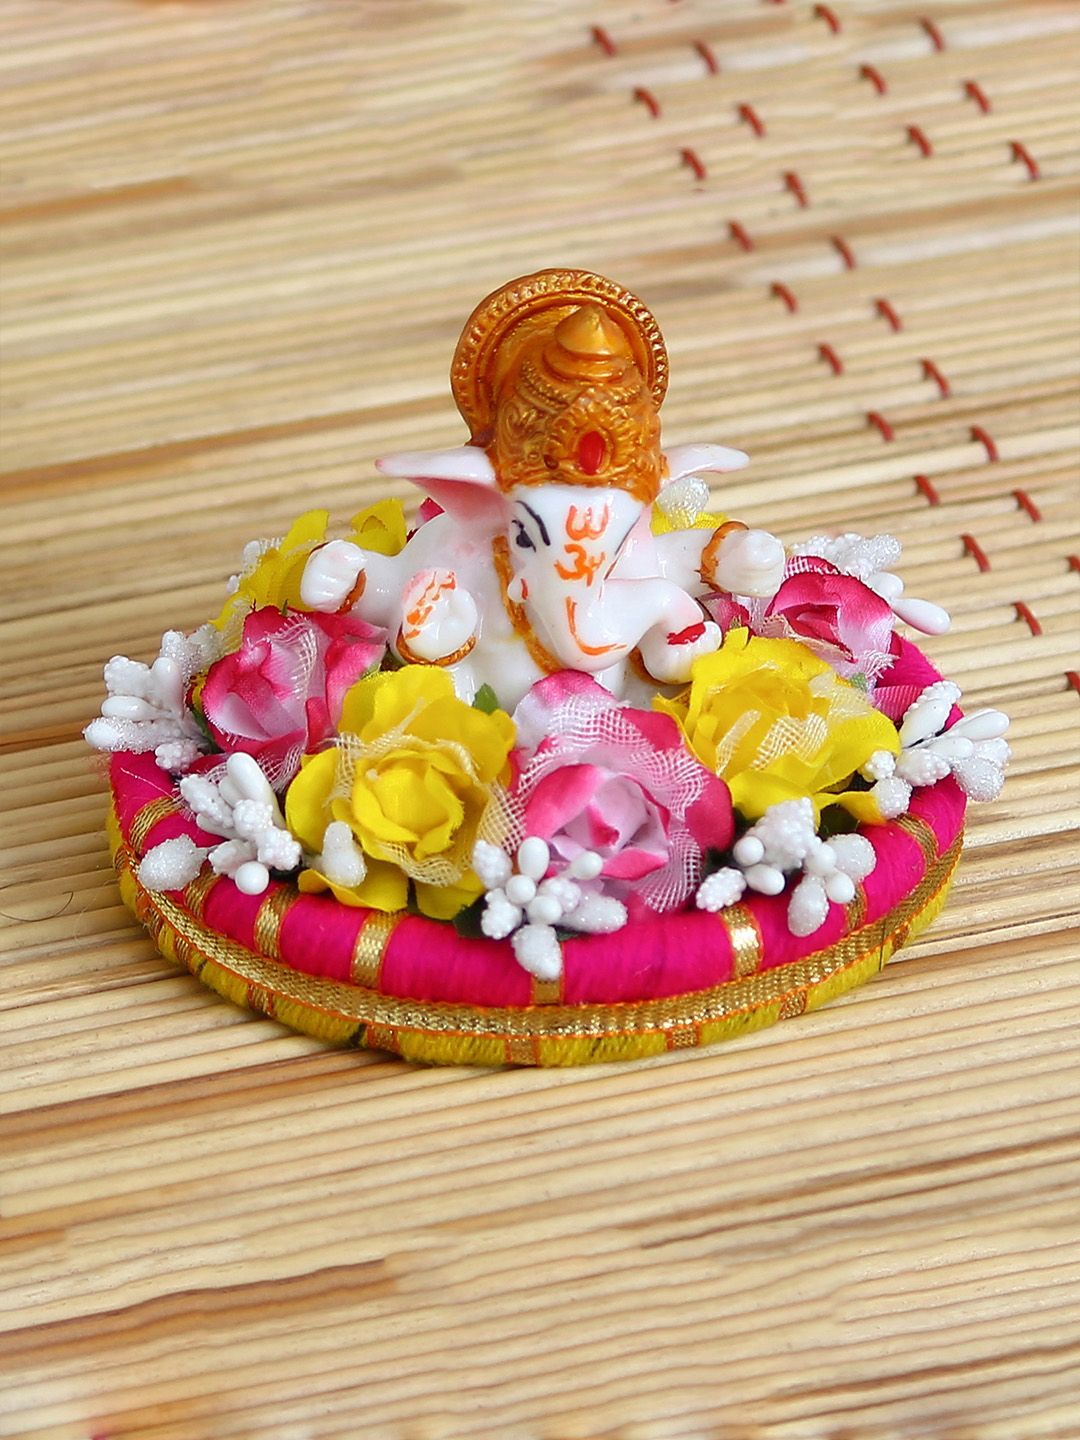 eCraftIndia Pink & Yellow Handcrafted Lord Ganesha On Plate With Flowers Showpiece Price in India